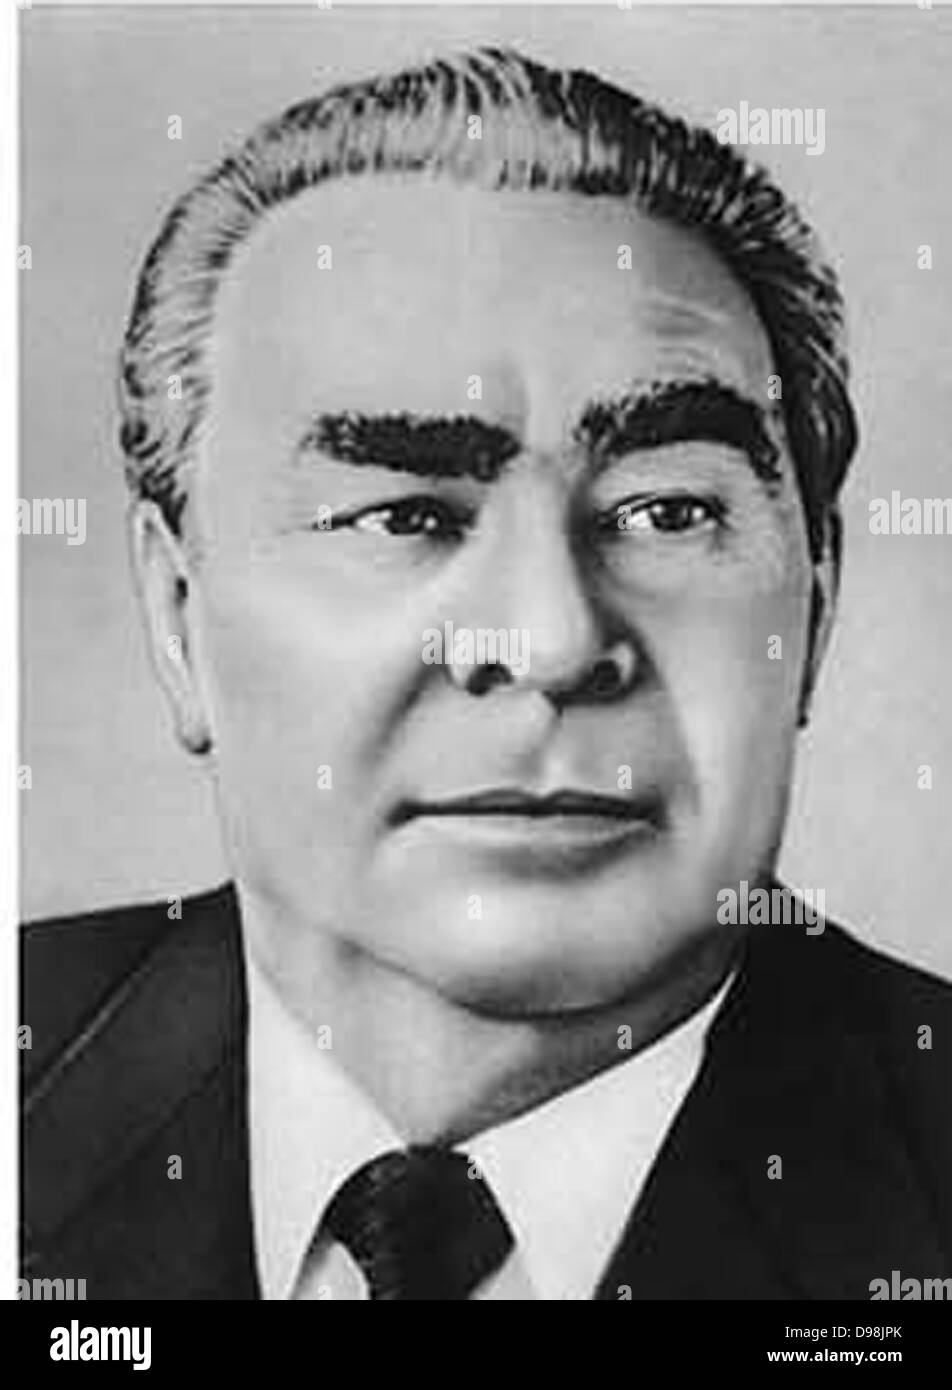 Leonid Ilyich Brezhnev in 1980. (1906 – 10 November 1982). Soviet  Russian statesman during the Cold War. Soviet politician. Secretary of the Central Committee (CC) of the Communist Party of the Soviet Union (CPSU), presiding over the country from 1964 until his death in 1982. Stock Photo